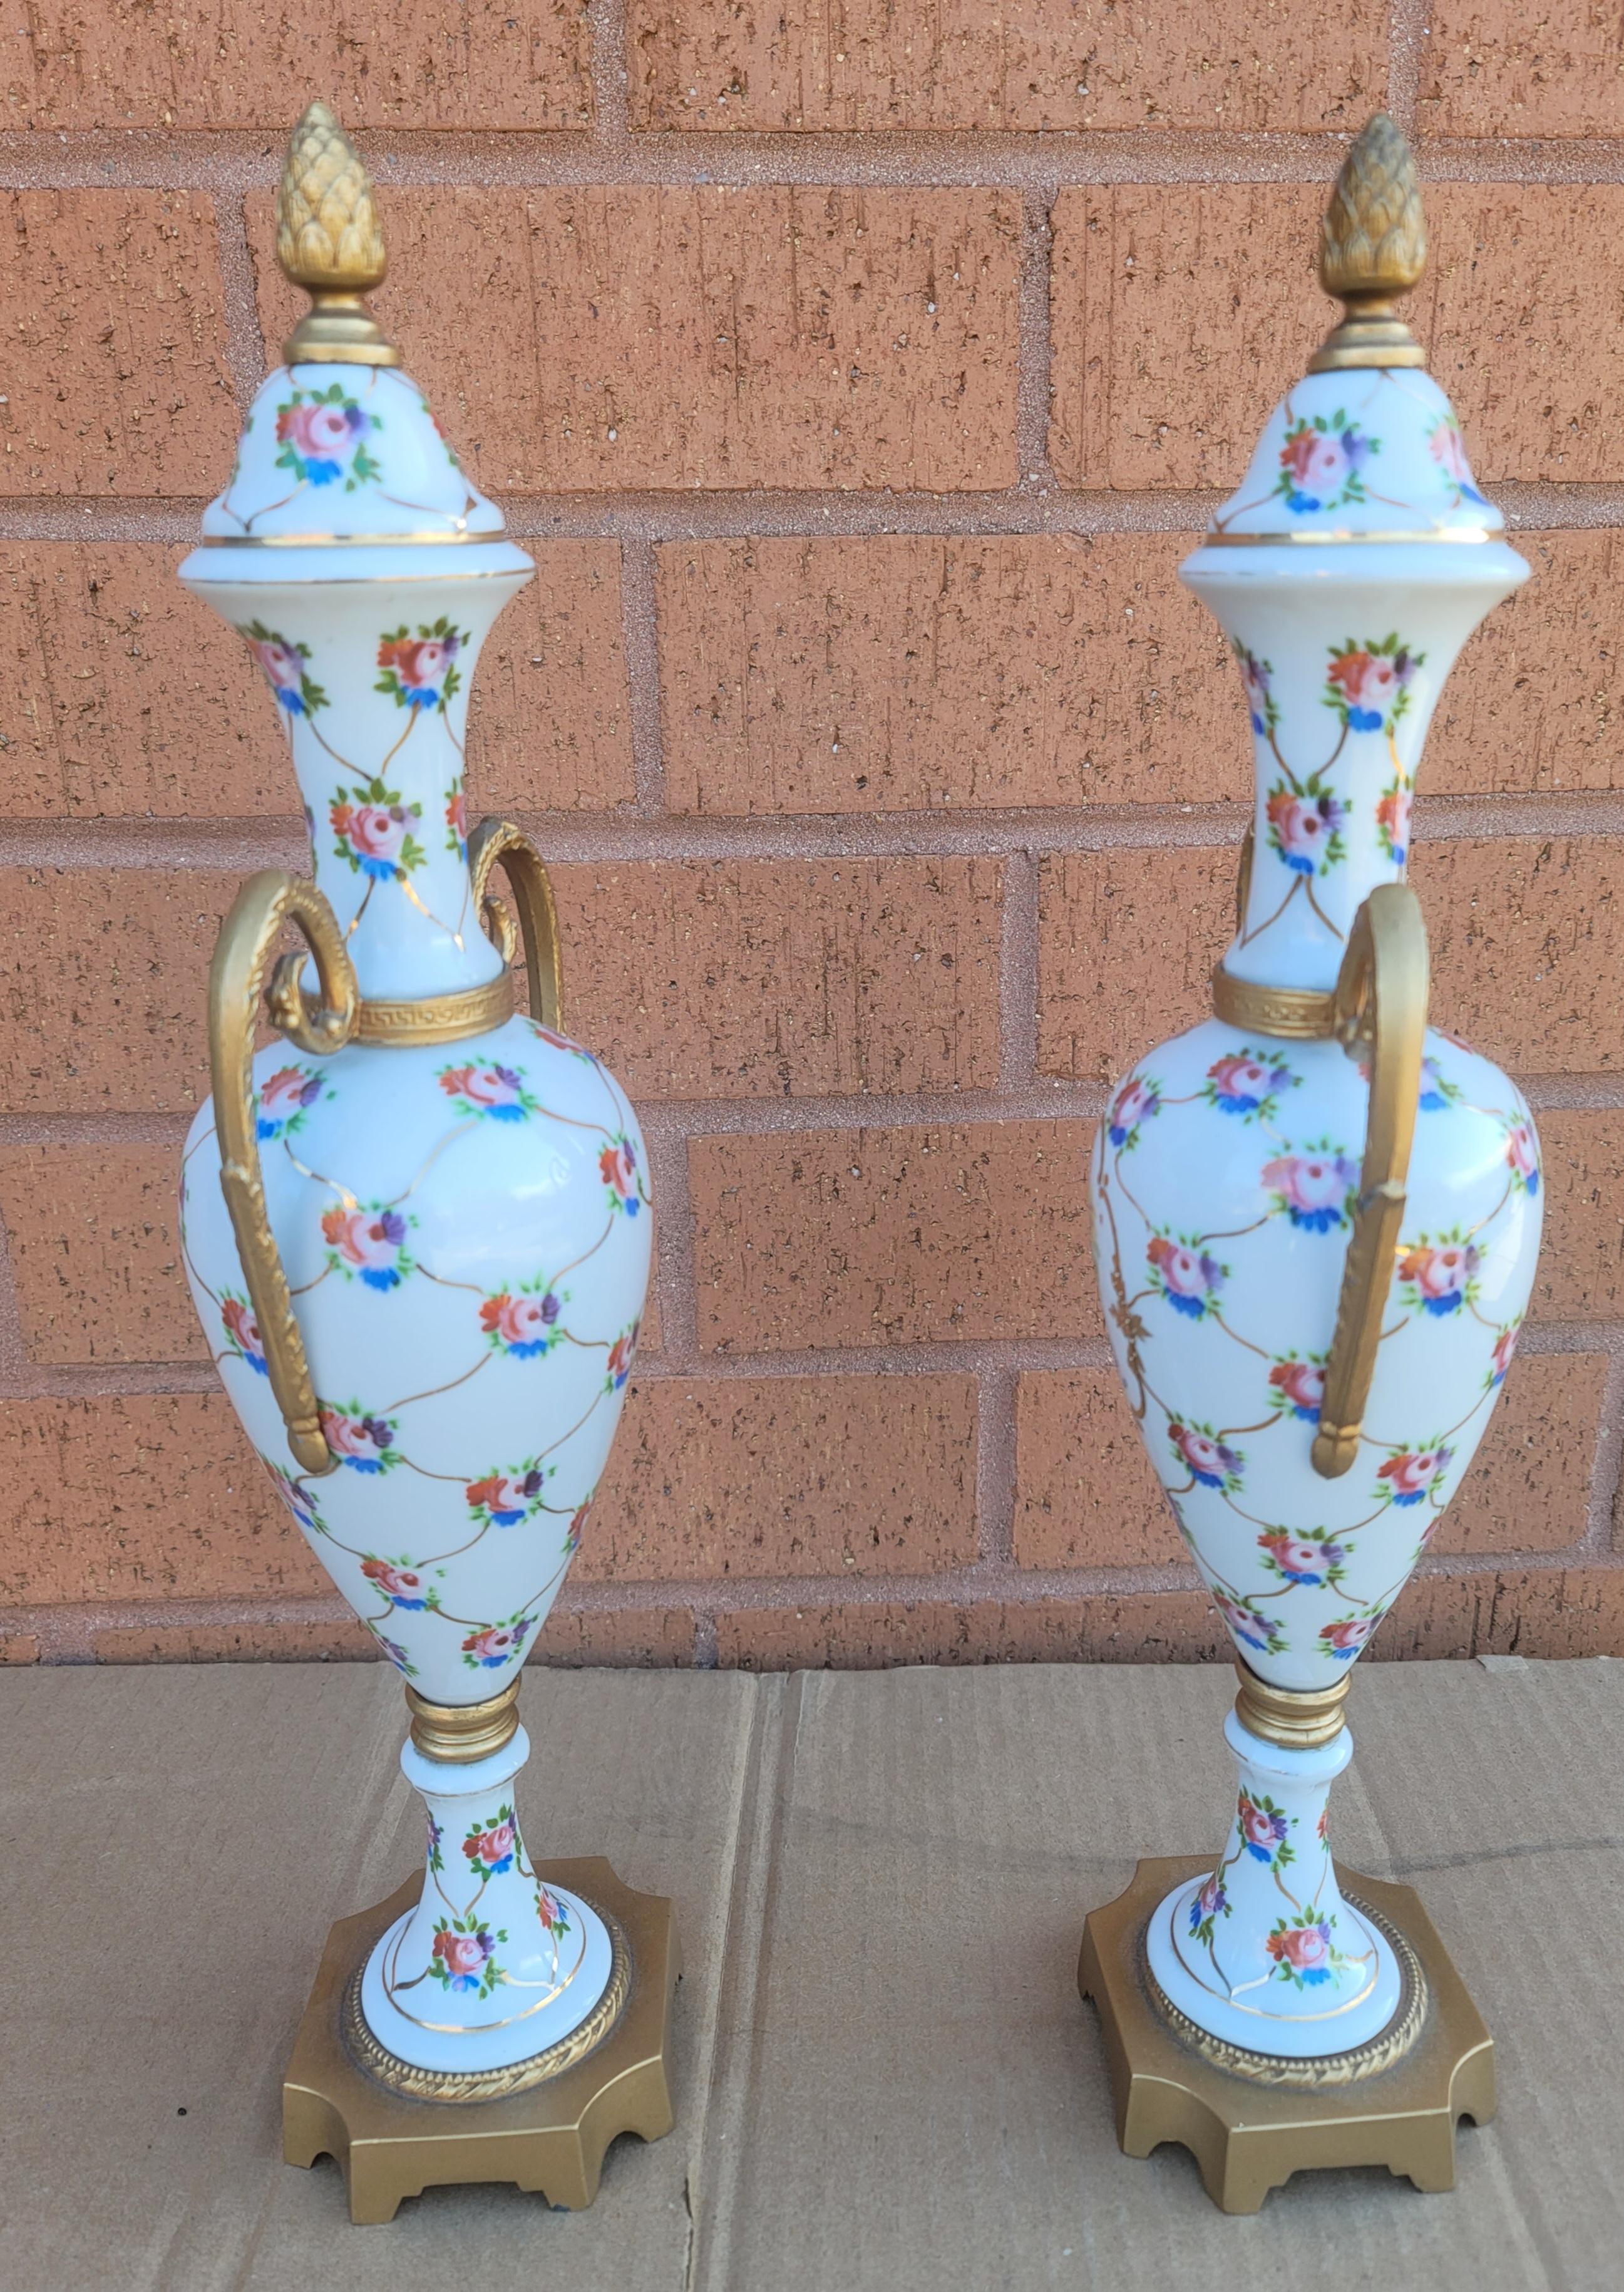 Pair of French Hand-Painted Porcelain and Gilt Metal Amphoras with no chips or cracks. Measure 5